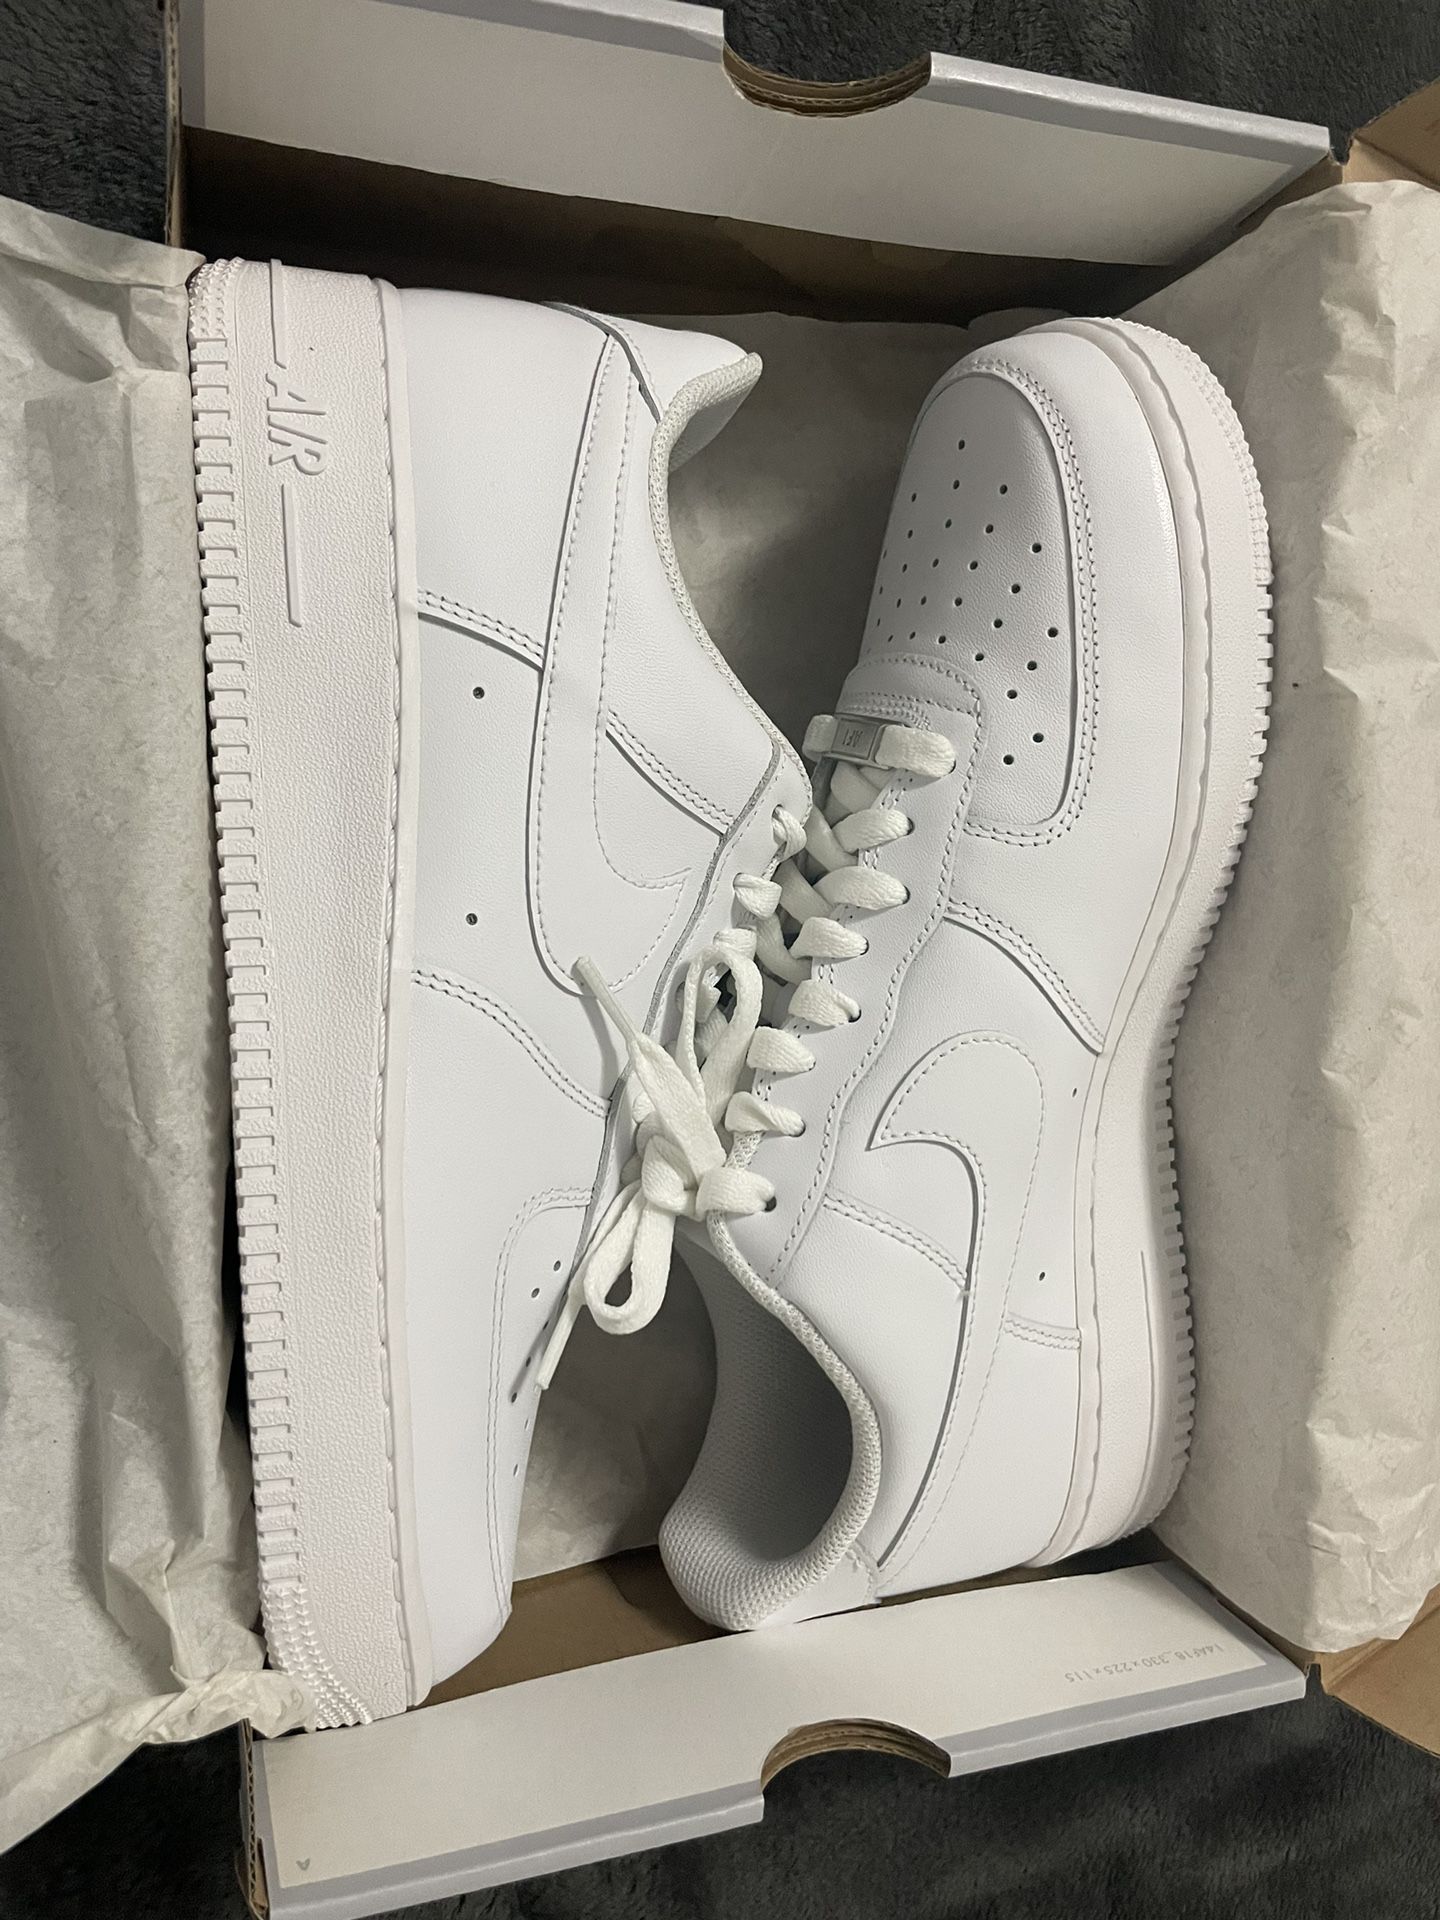 NIKE AIR FORCE 1 '07 LV 8LT SZ 6.5 for Sale in Miami, FL - OfferUp